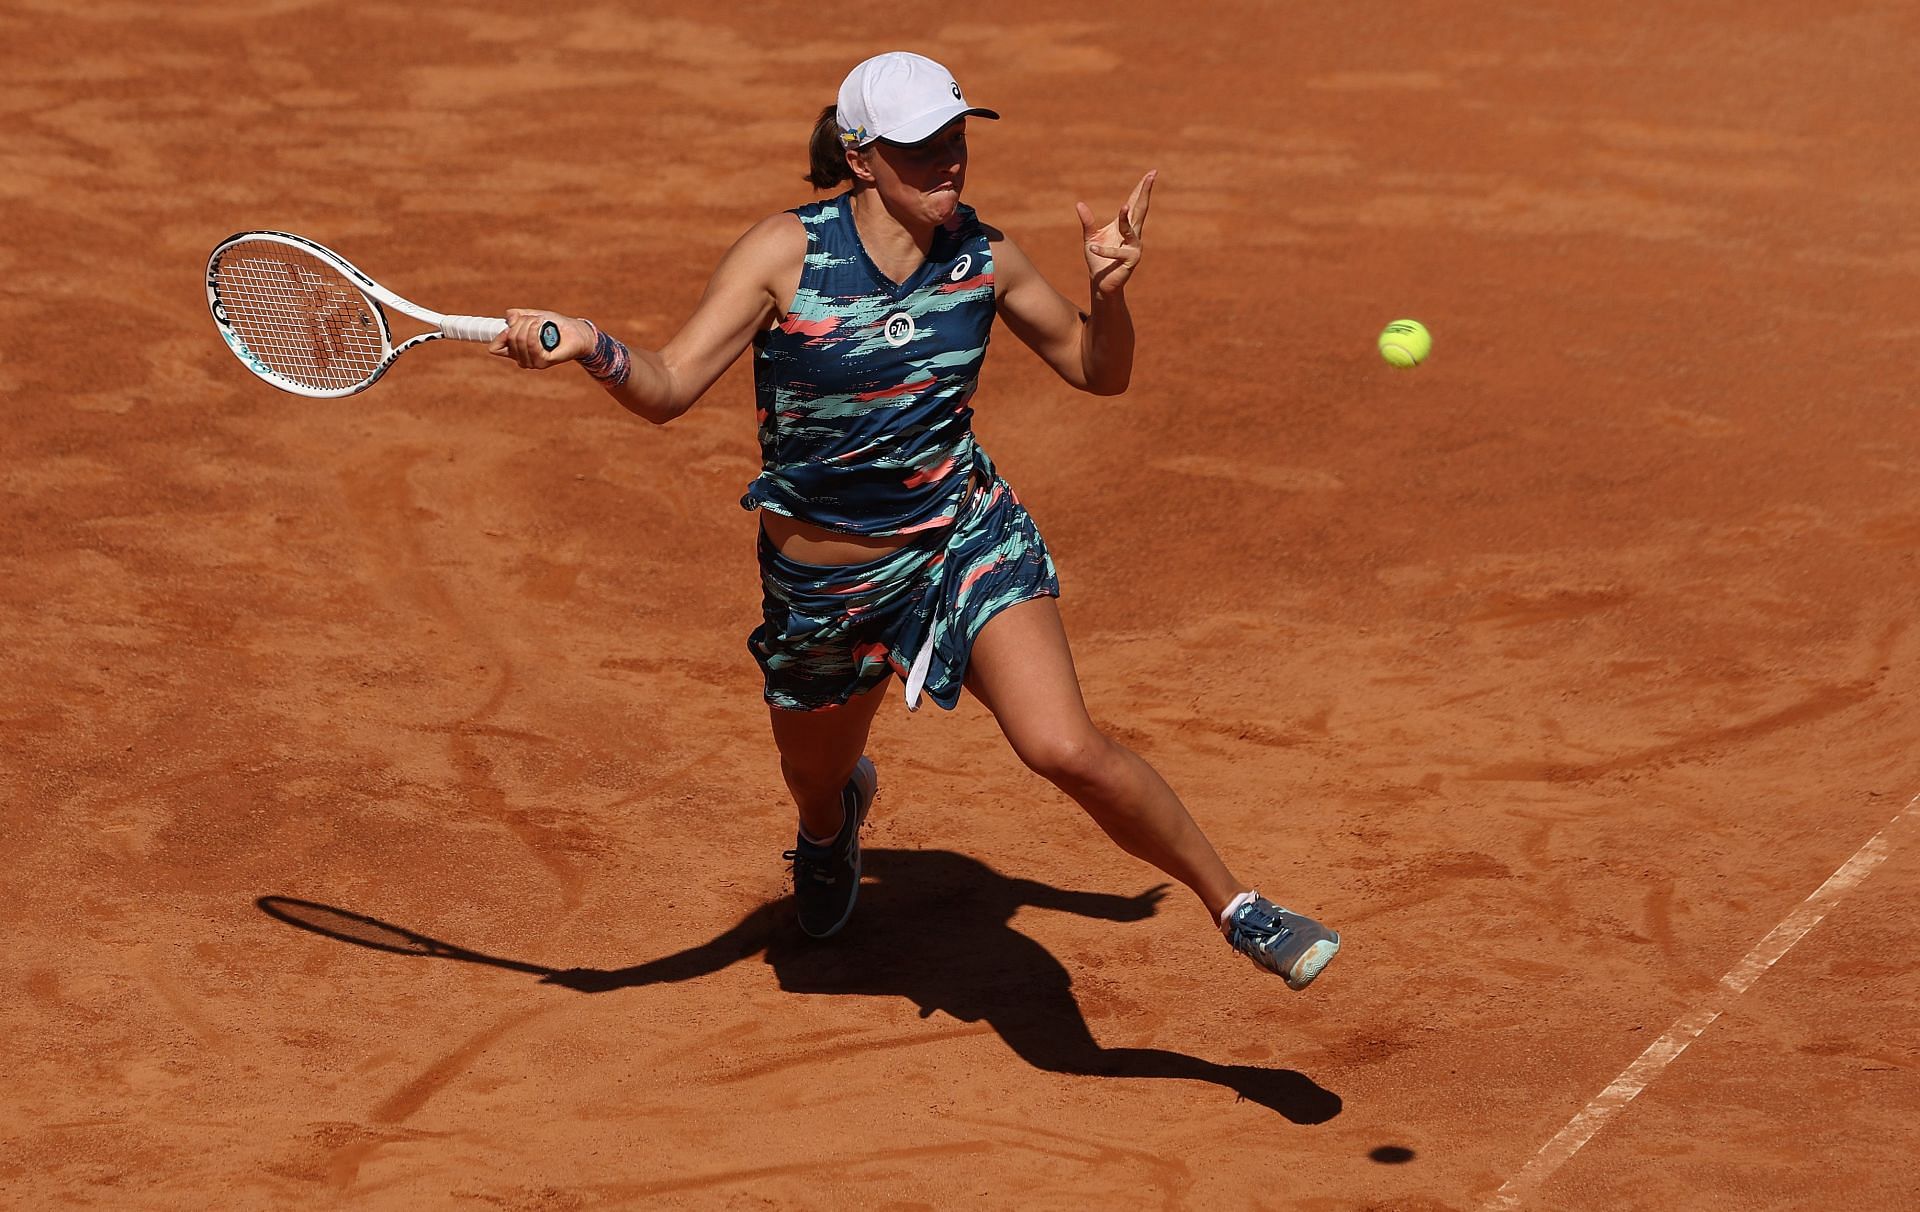 World No. 1 Iga Swiatek sustains her dominance with a win over Bianca Andreescu in the quarterfinals of the Italian Open.